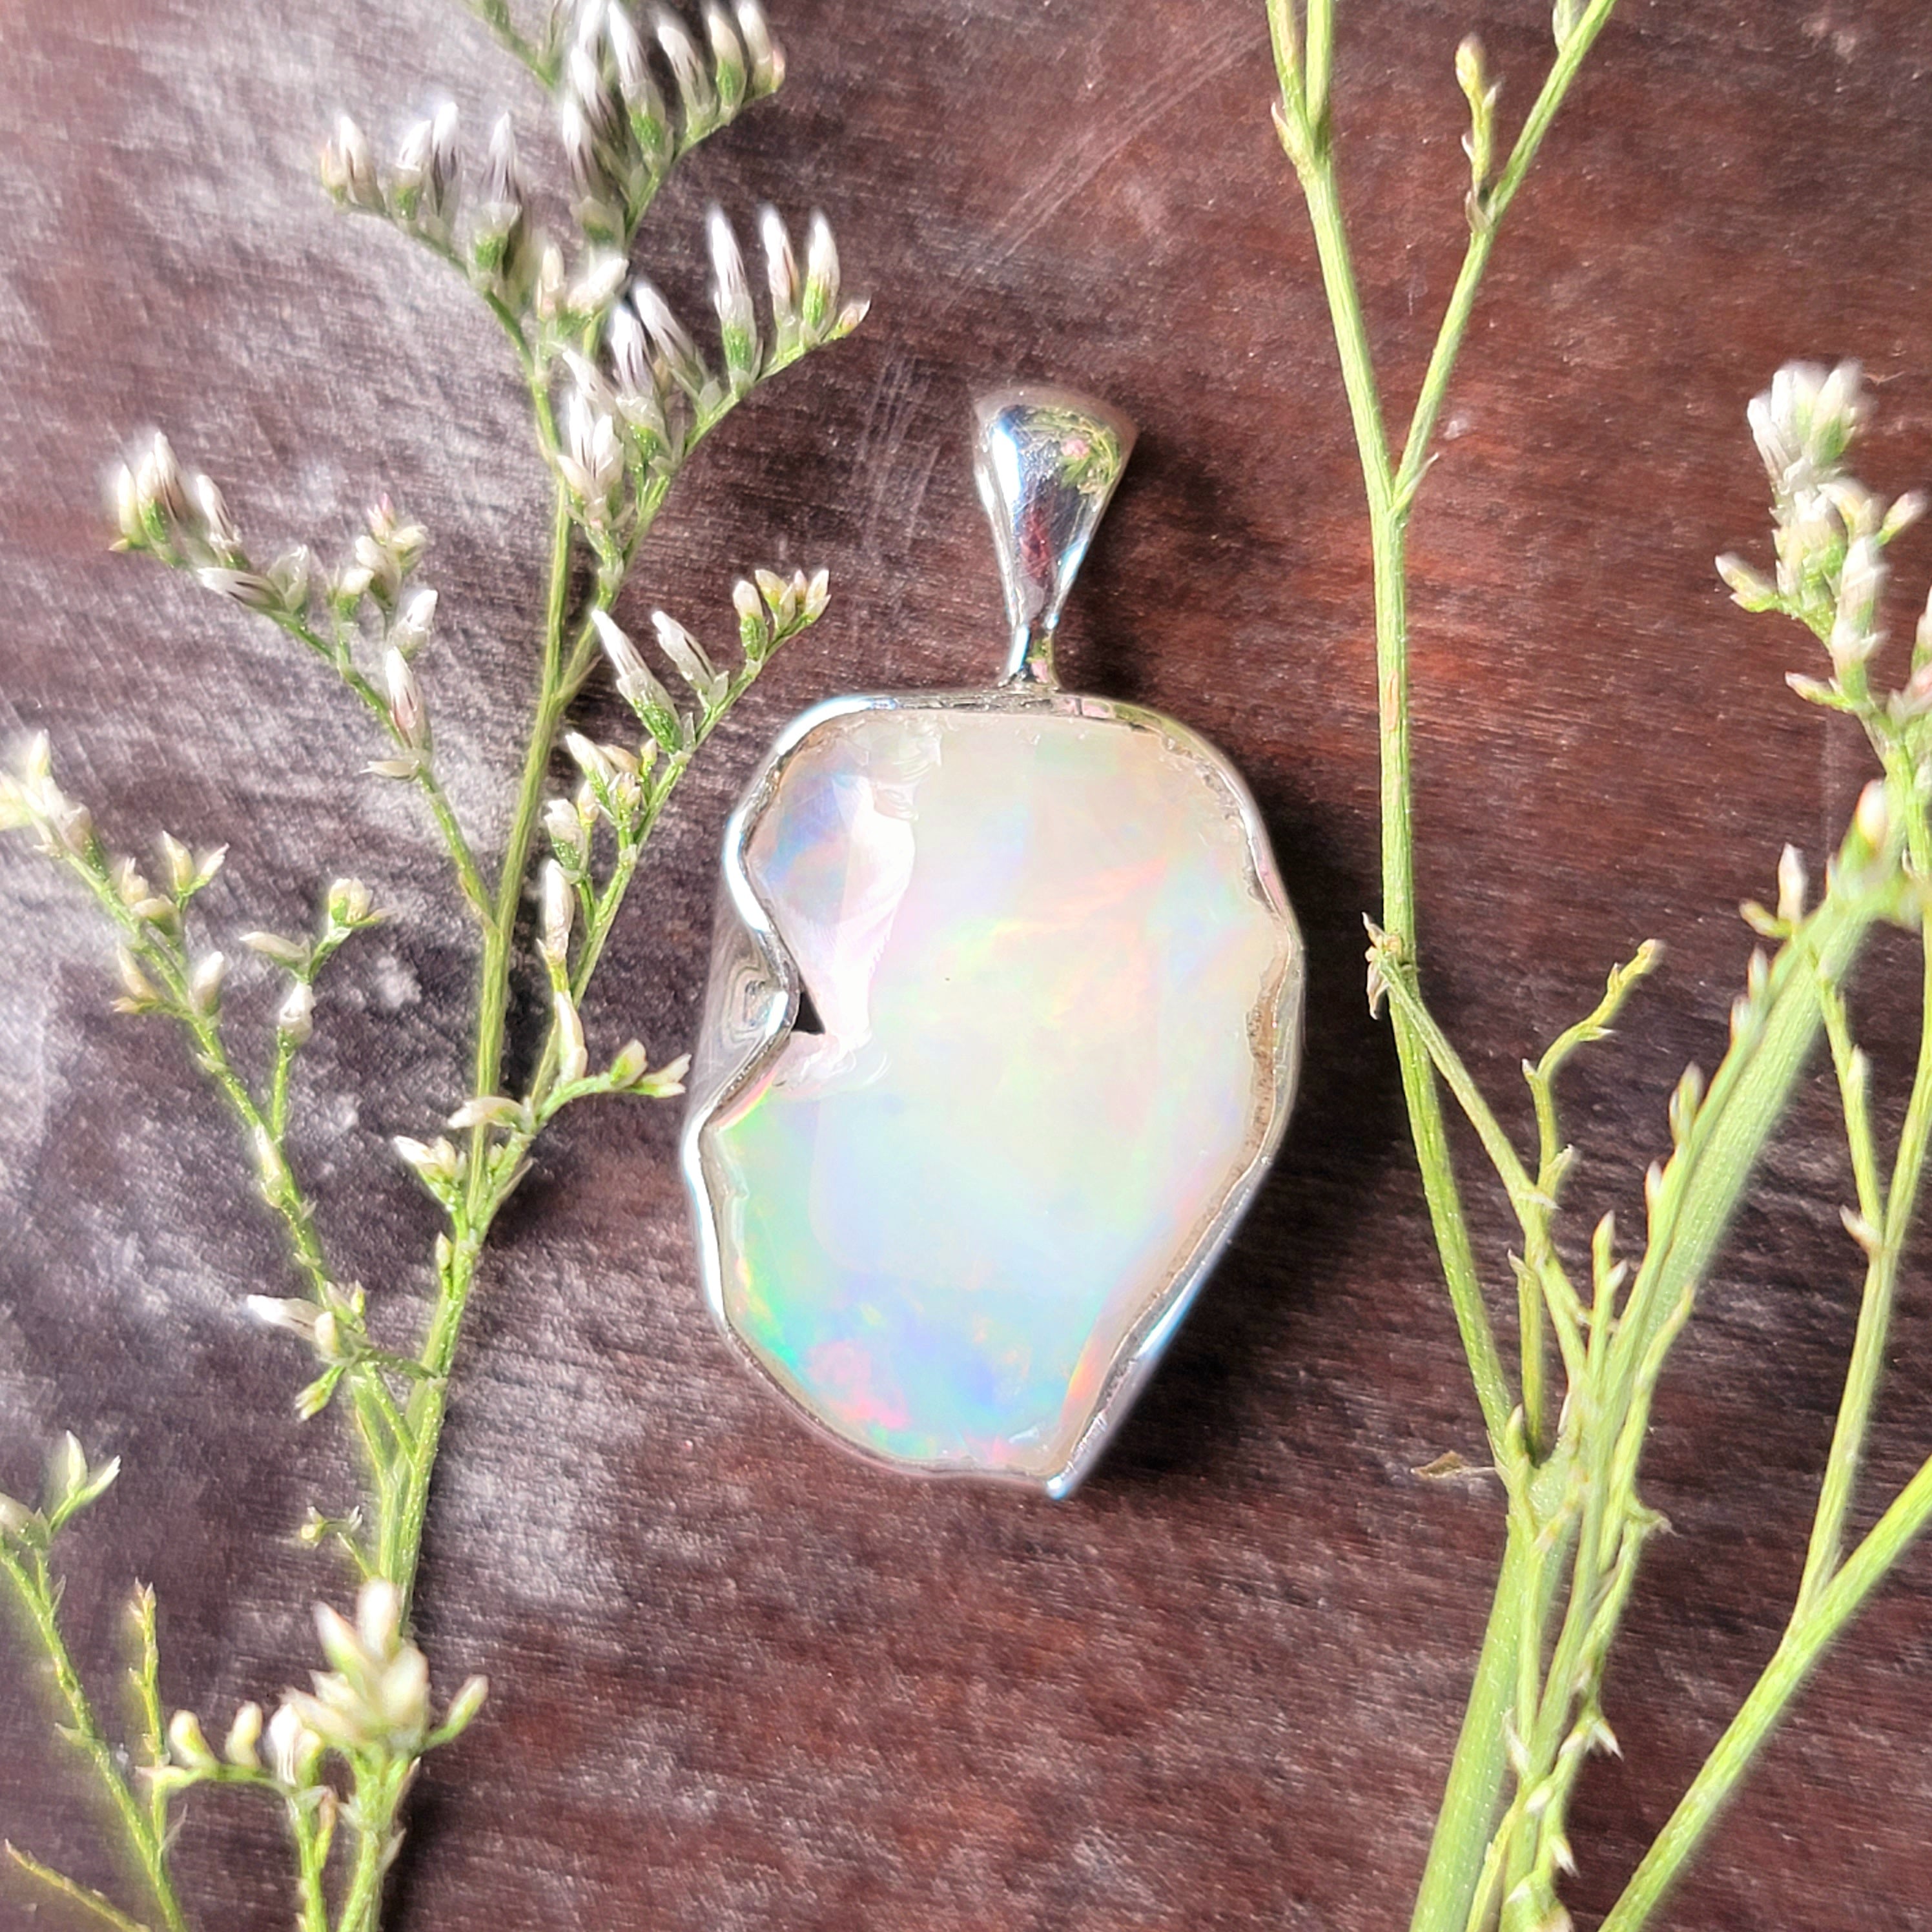 Ethiopian Opal Pendant .925 Silver for Creativity, Joy and Self Discovery